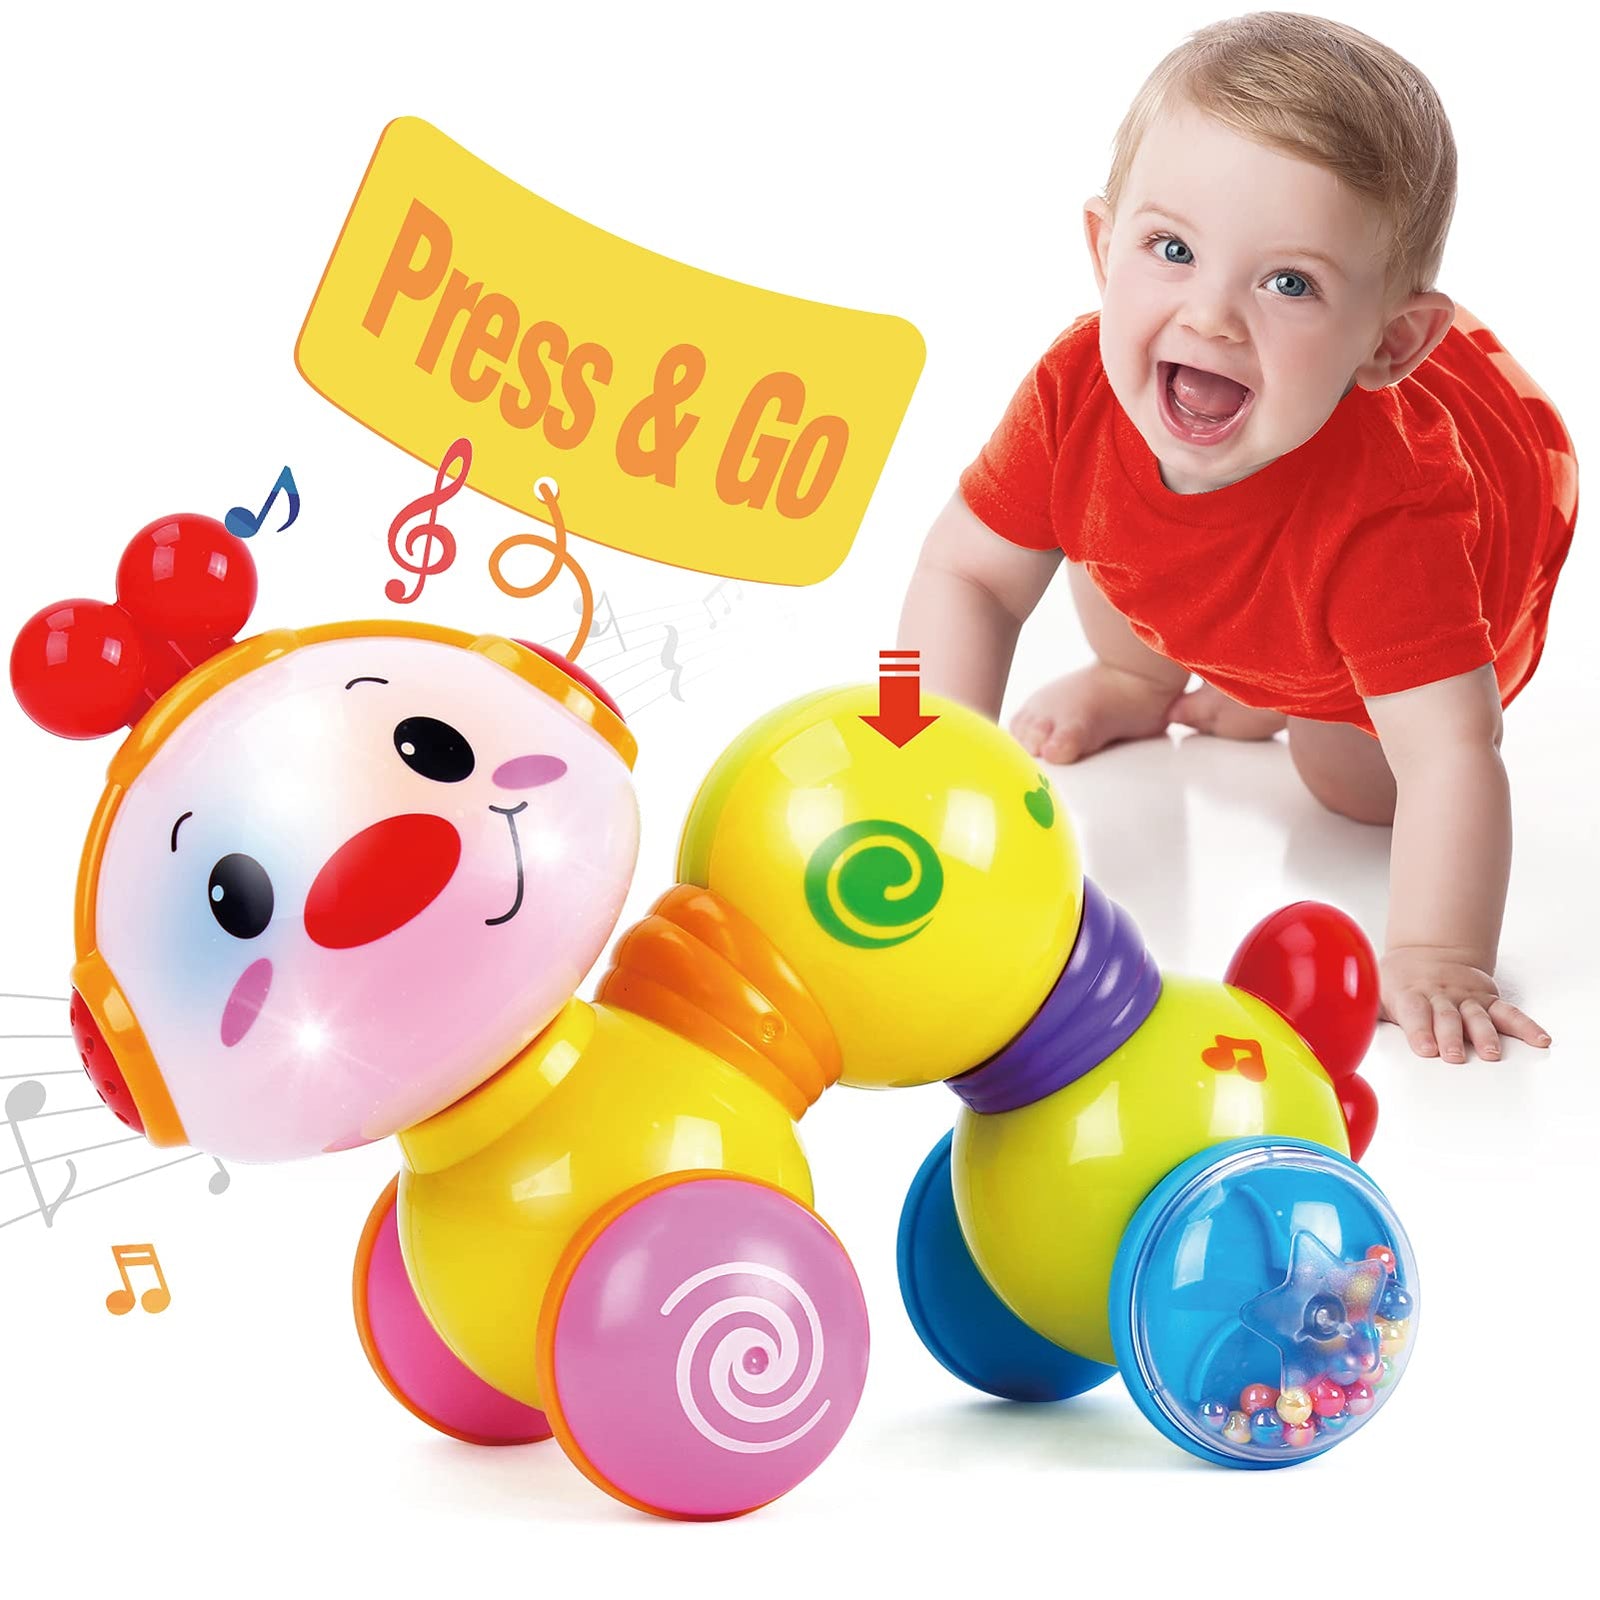 Baby Toys 6 to 12 Months Musical Press and Go Baby Toys 12-18 Months Baby Girl Gifts Baby Boy Toys Crawling Toys with Light Inflant Toys 6-12 Months Toys 1 Year Old Girls Boys